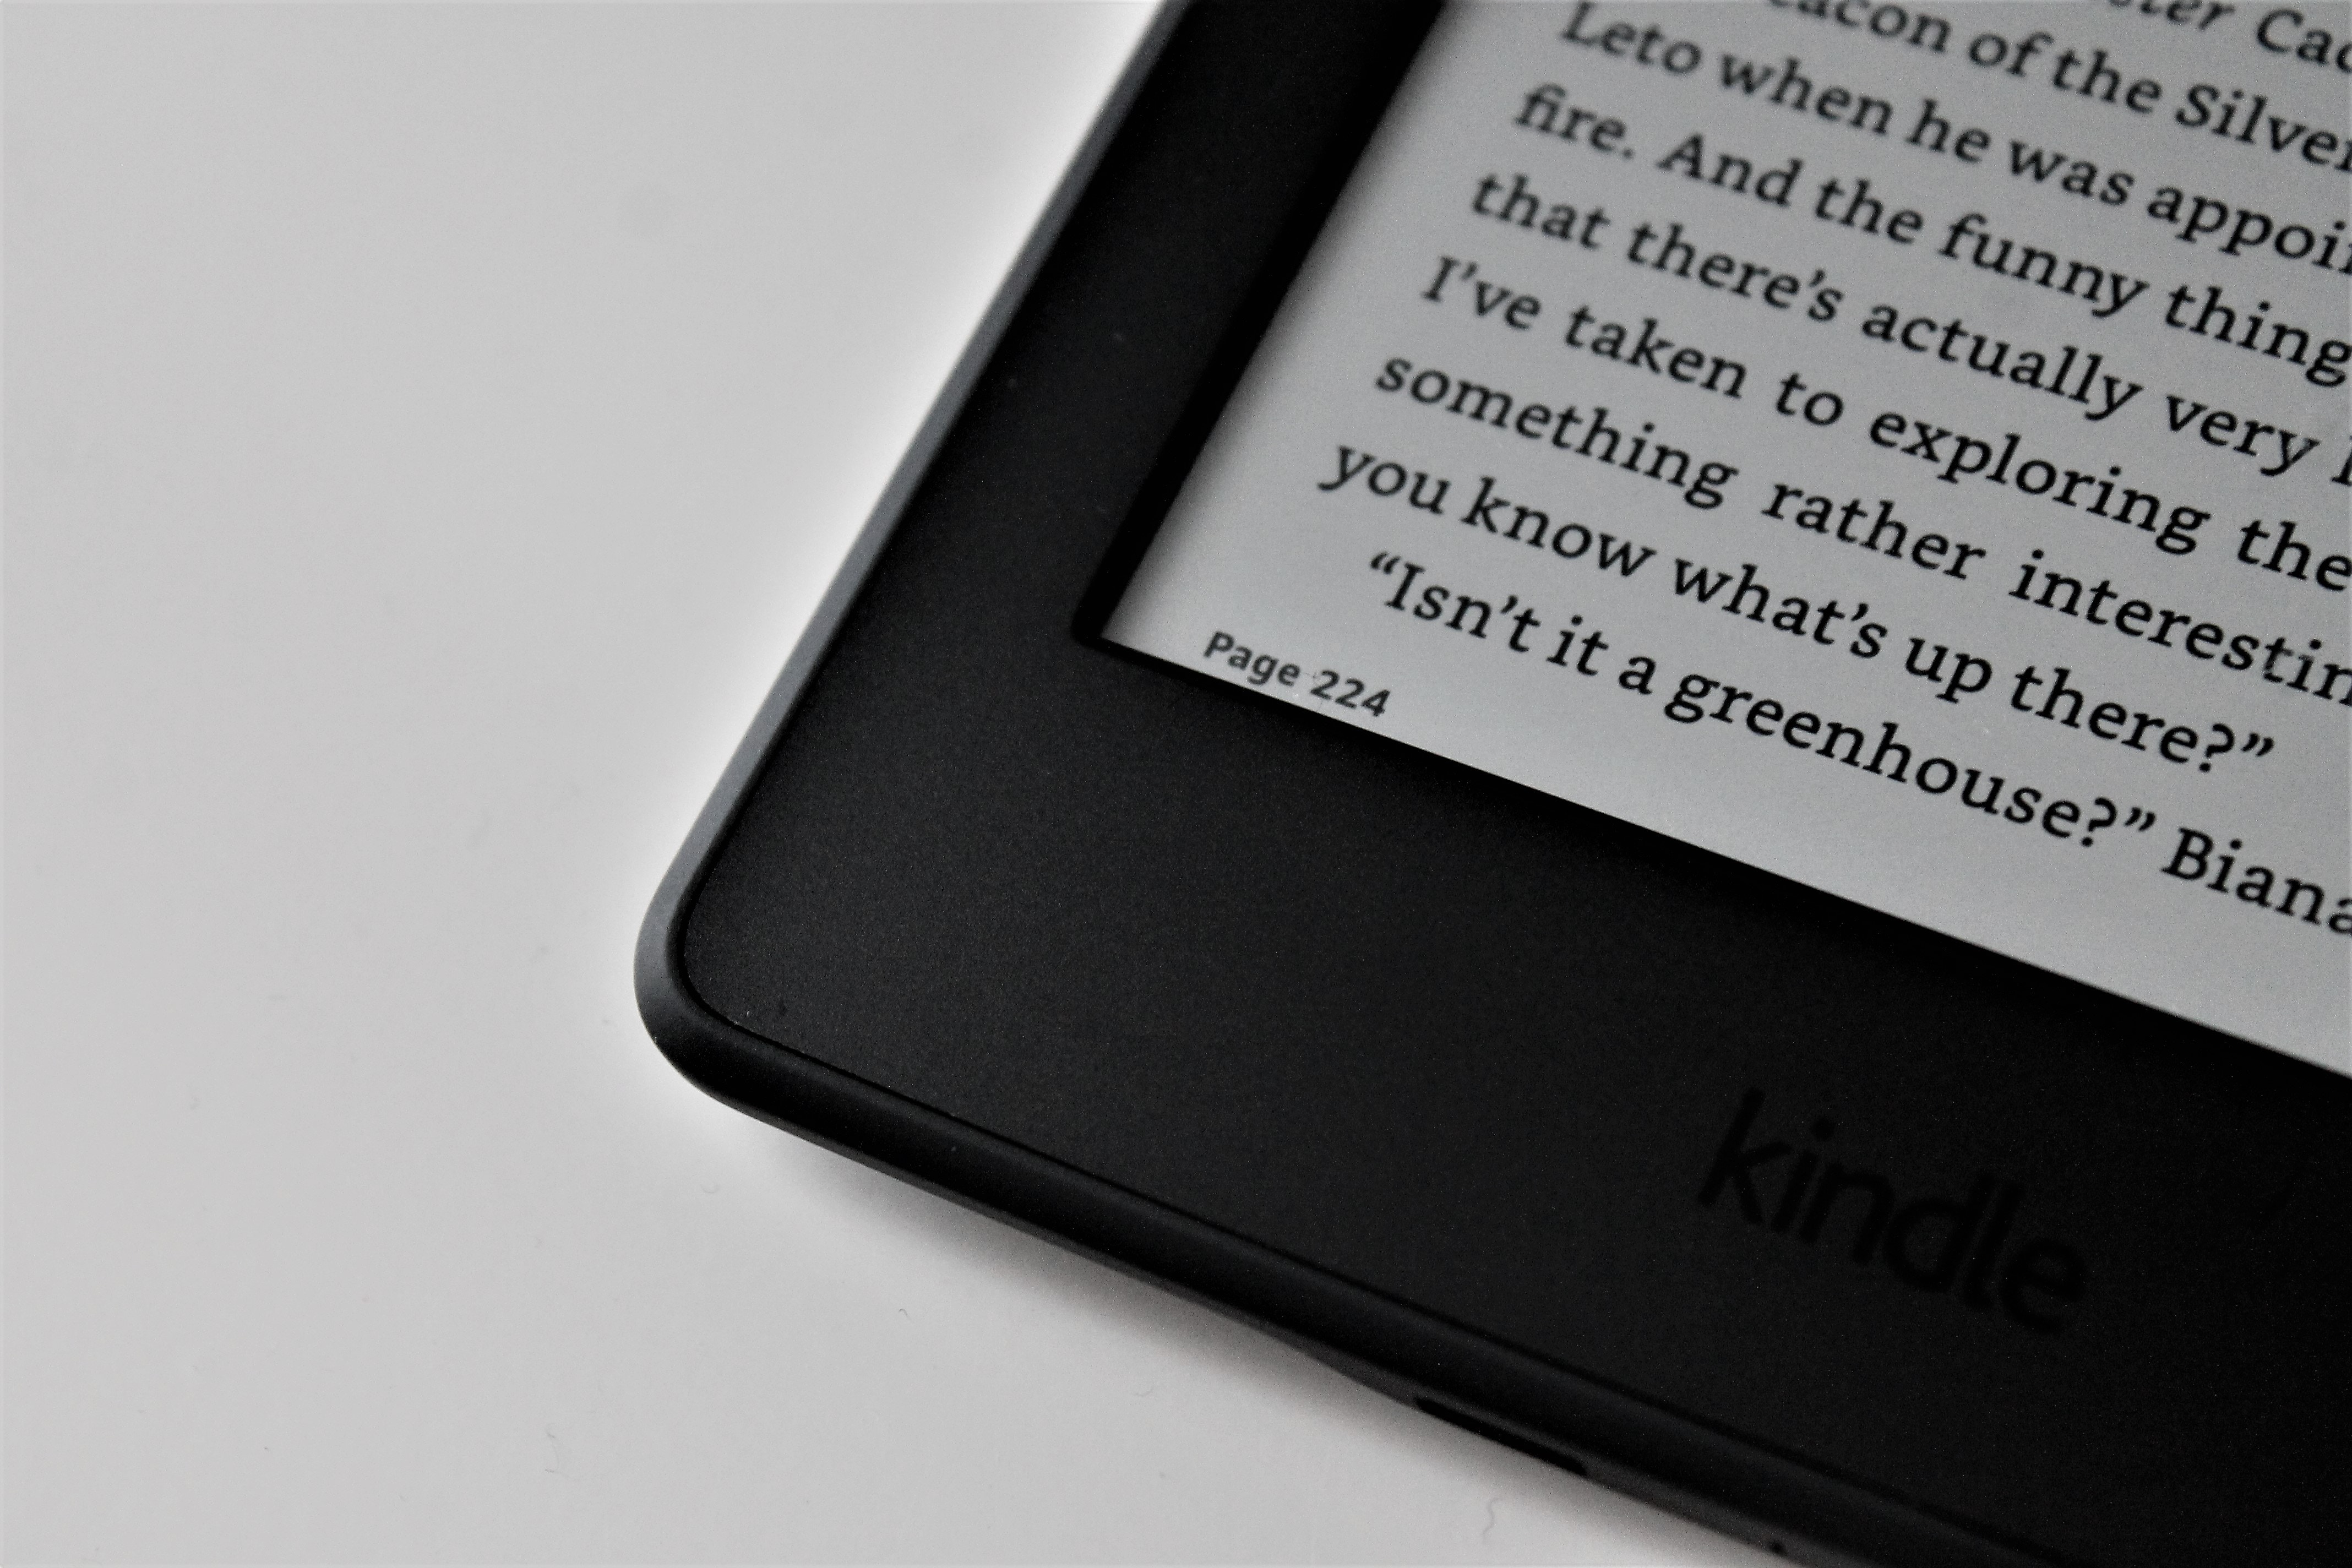 DRM-Free e-Books Are Now Available. Here’s Why That’s a Big Deal